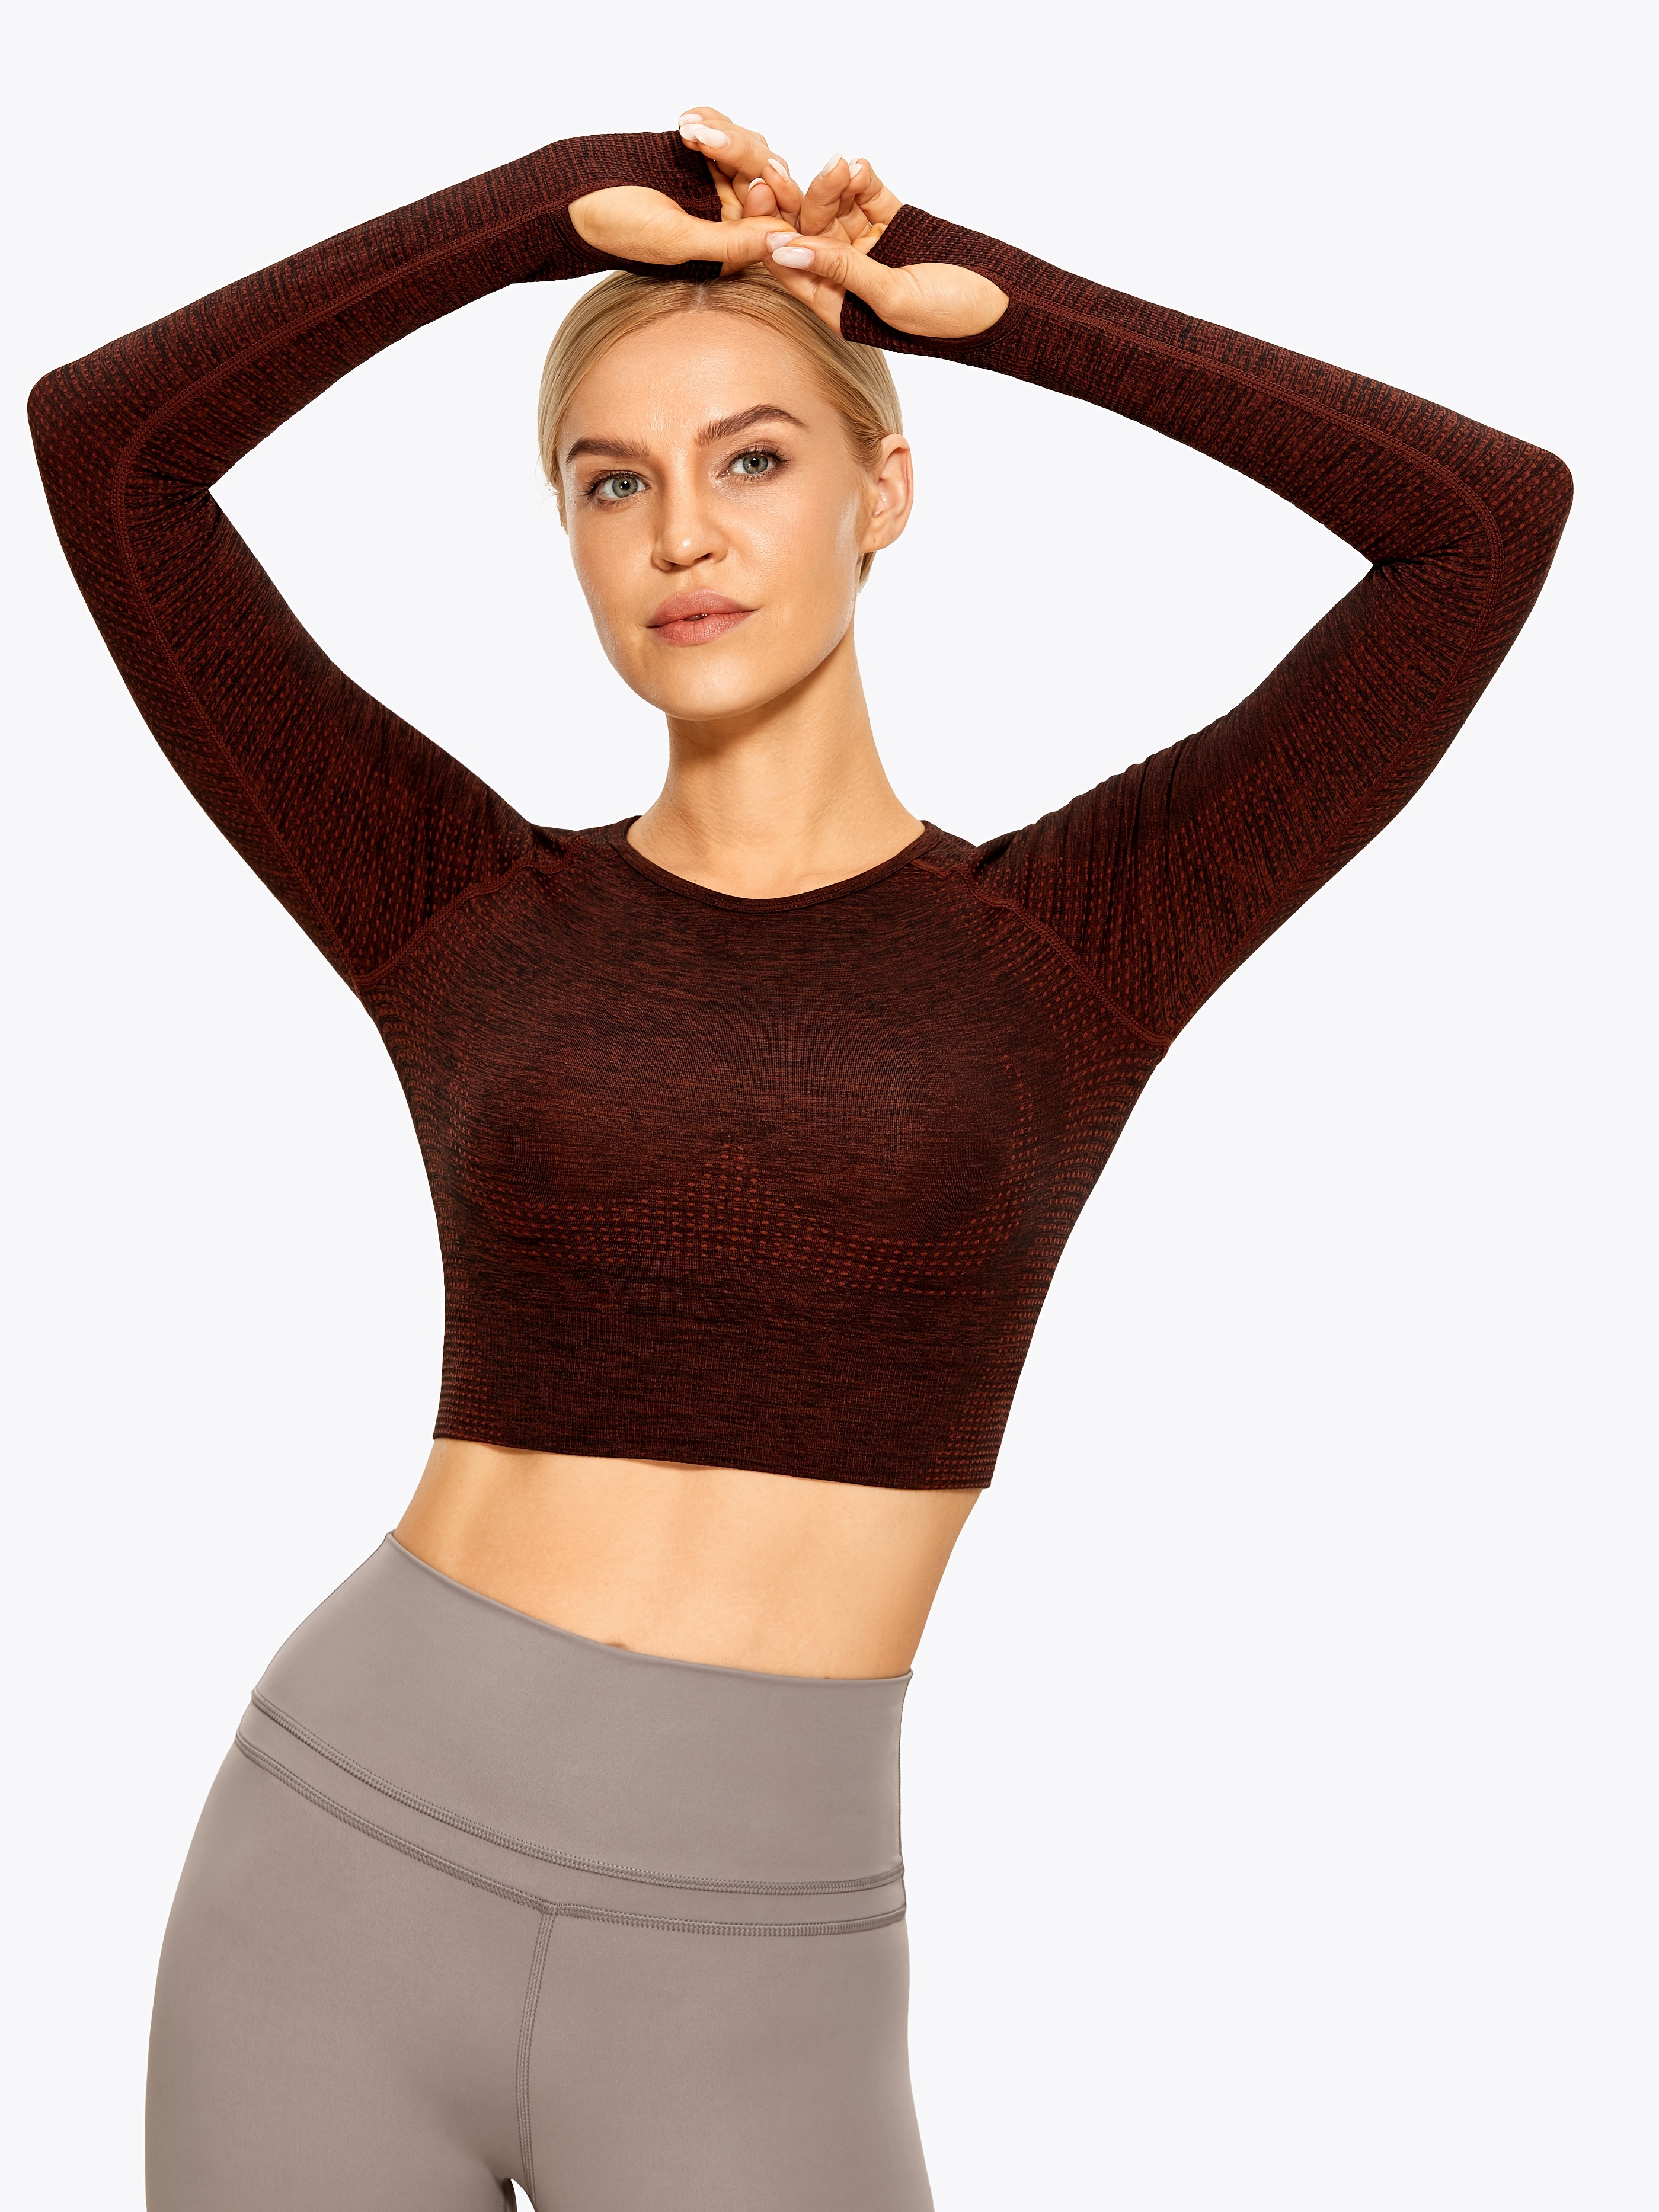 Contrast Mesh Shockproof Yoga Top, Round Neck Mid-Stretch Workout Crop Top,  Women's Activewear